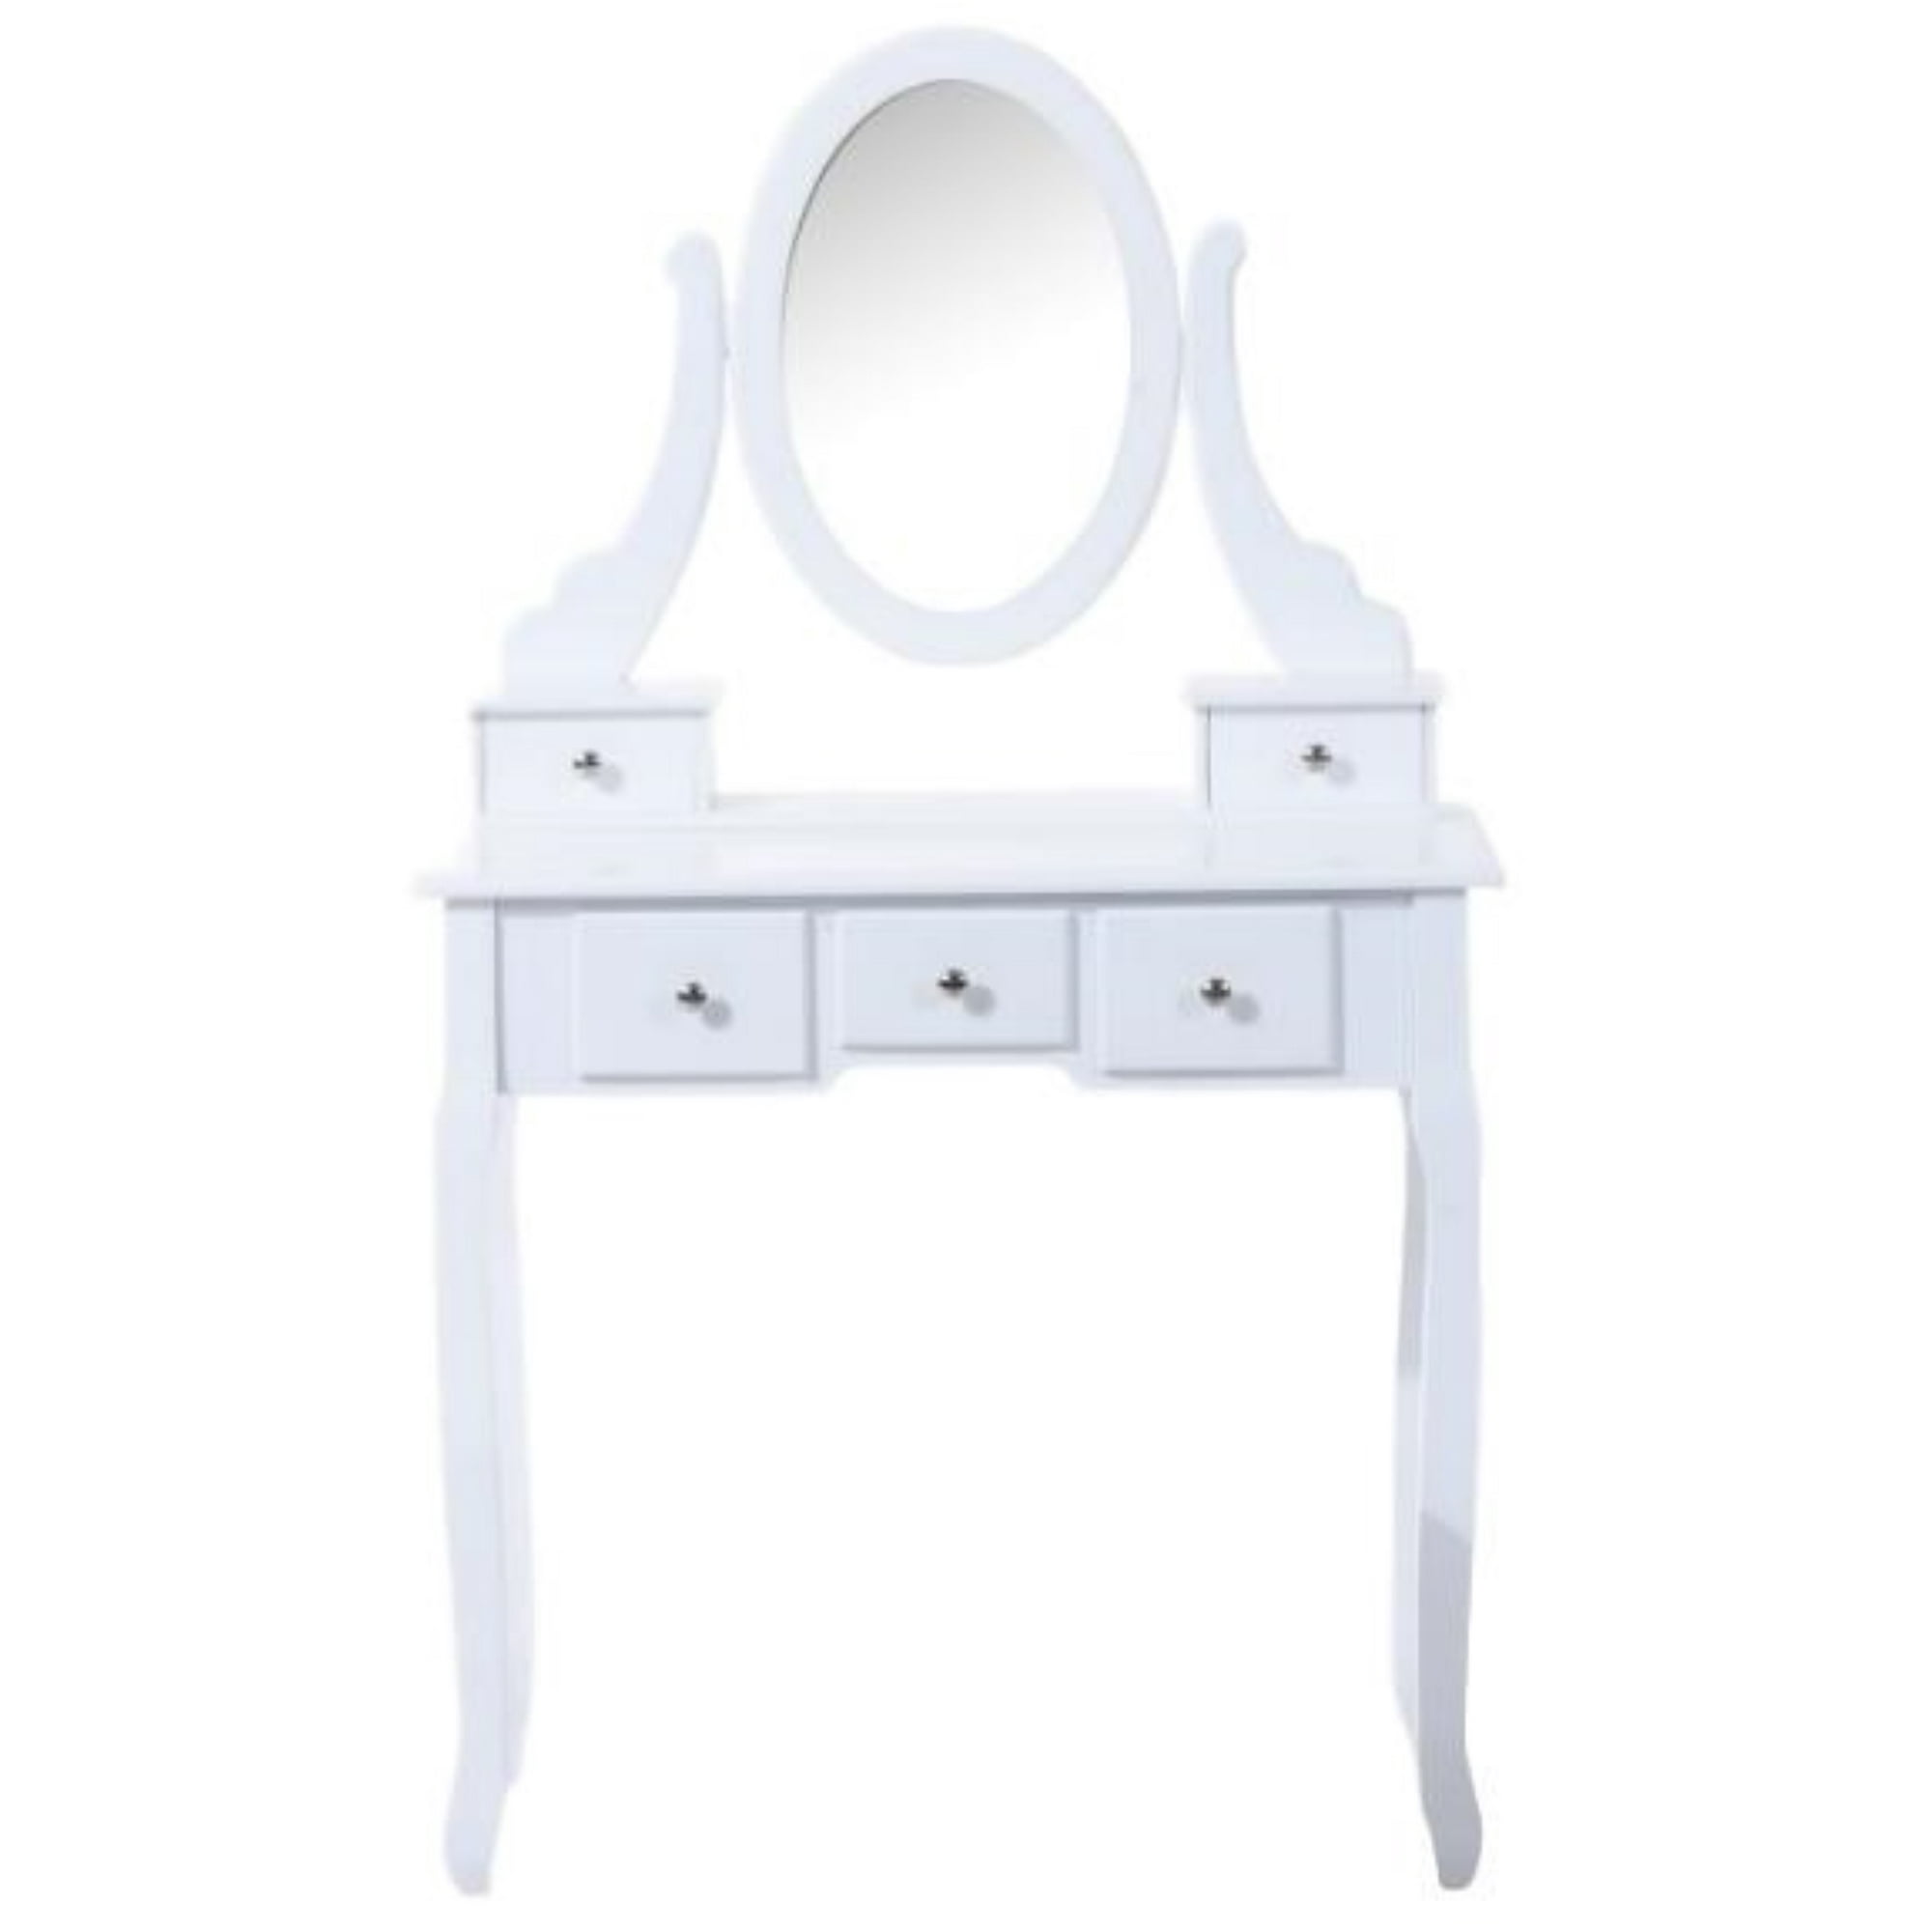 Viscologic Ivory Wooden Mirrored Makeup, Viscologic Pearl Wooden Mirrored Makeup Vanity Table White